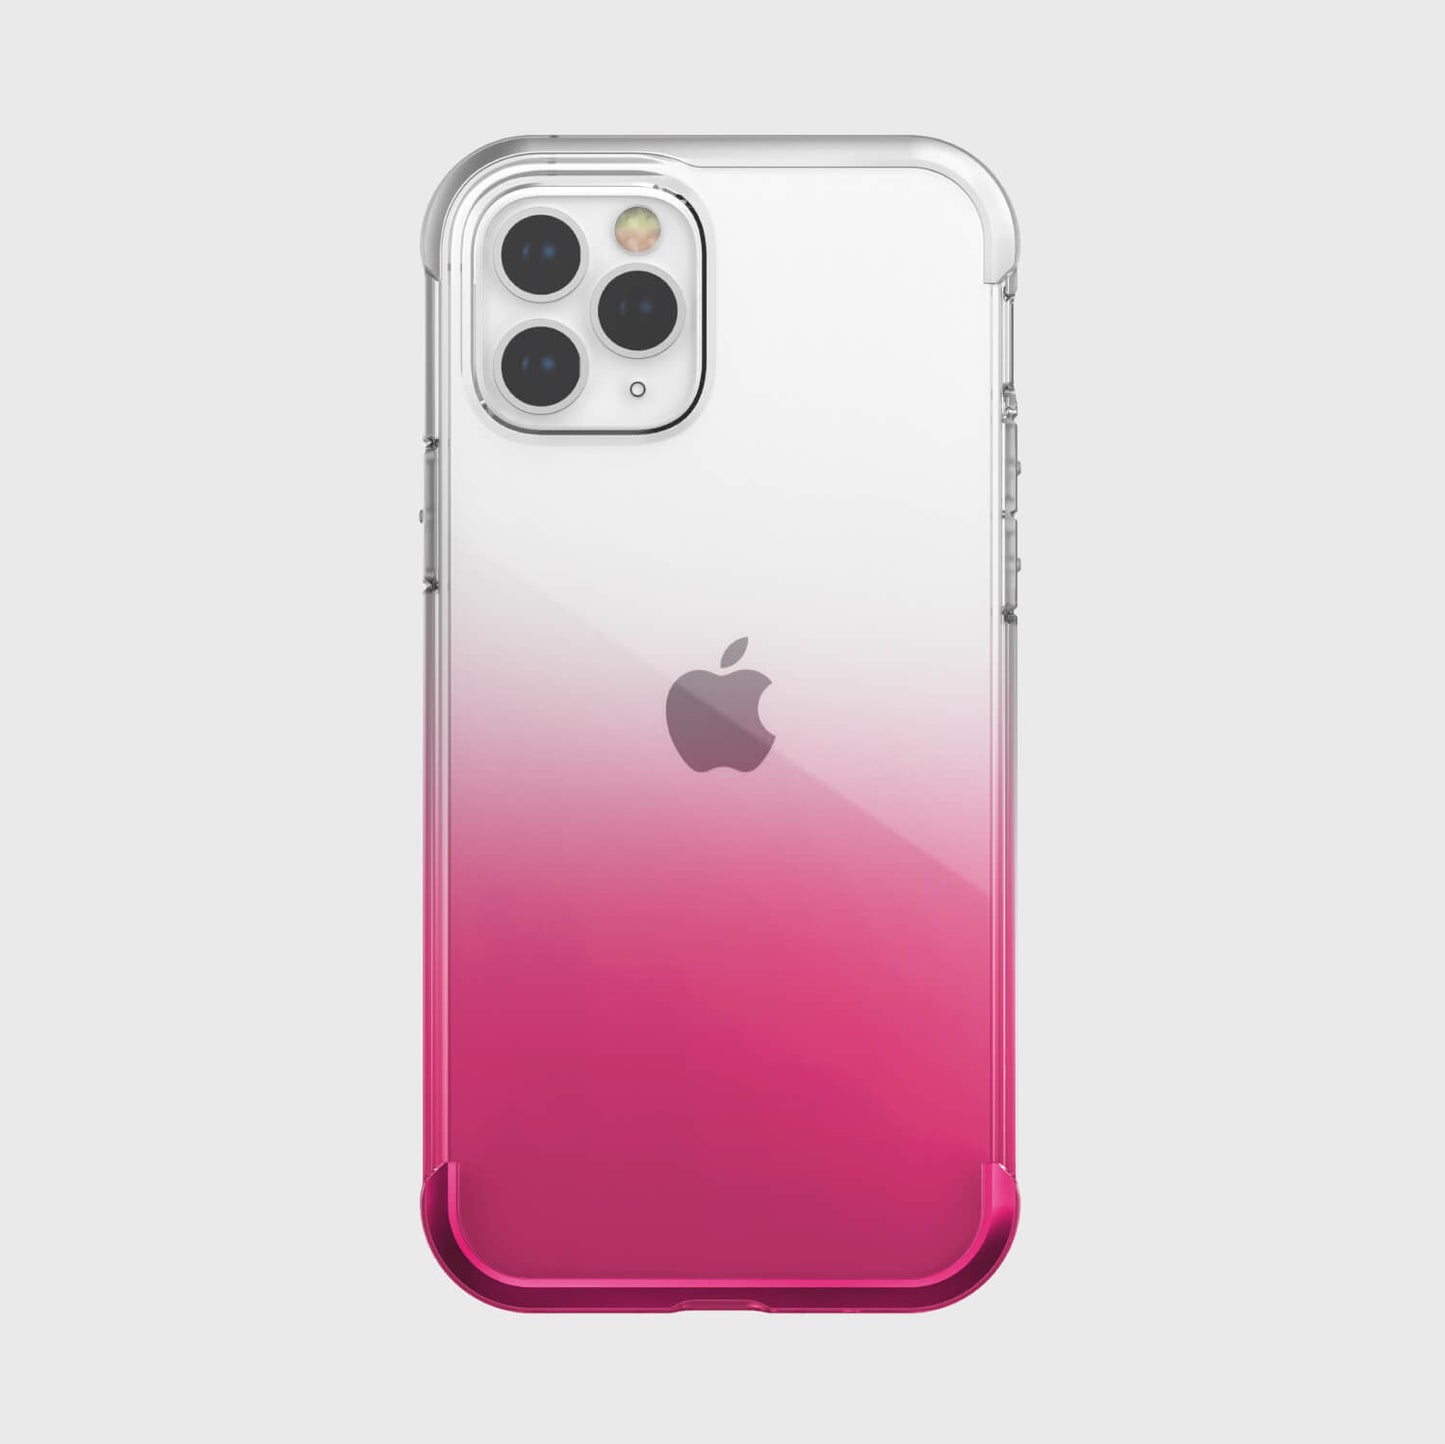 An iPhone 12 Pro Max Case - AIR in pink and white with wireless charging compatibility from Raptic.